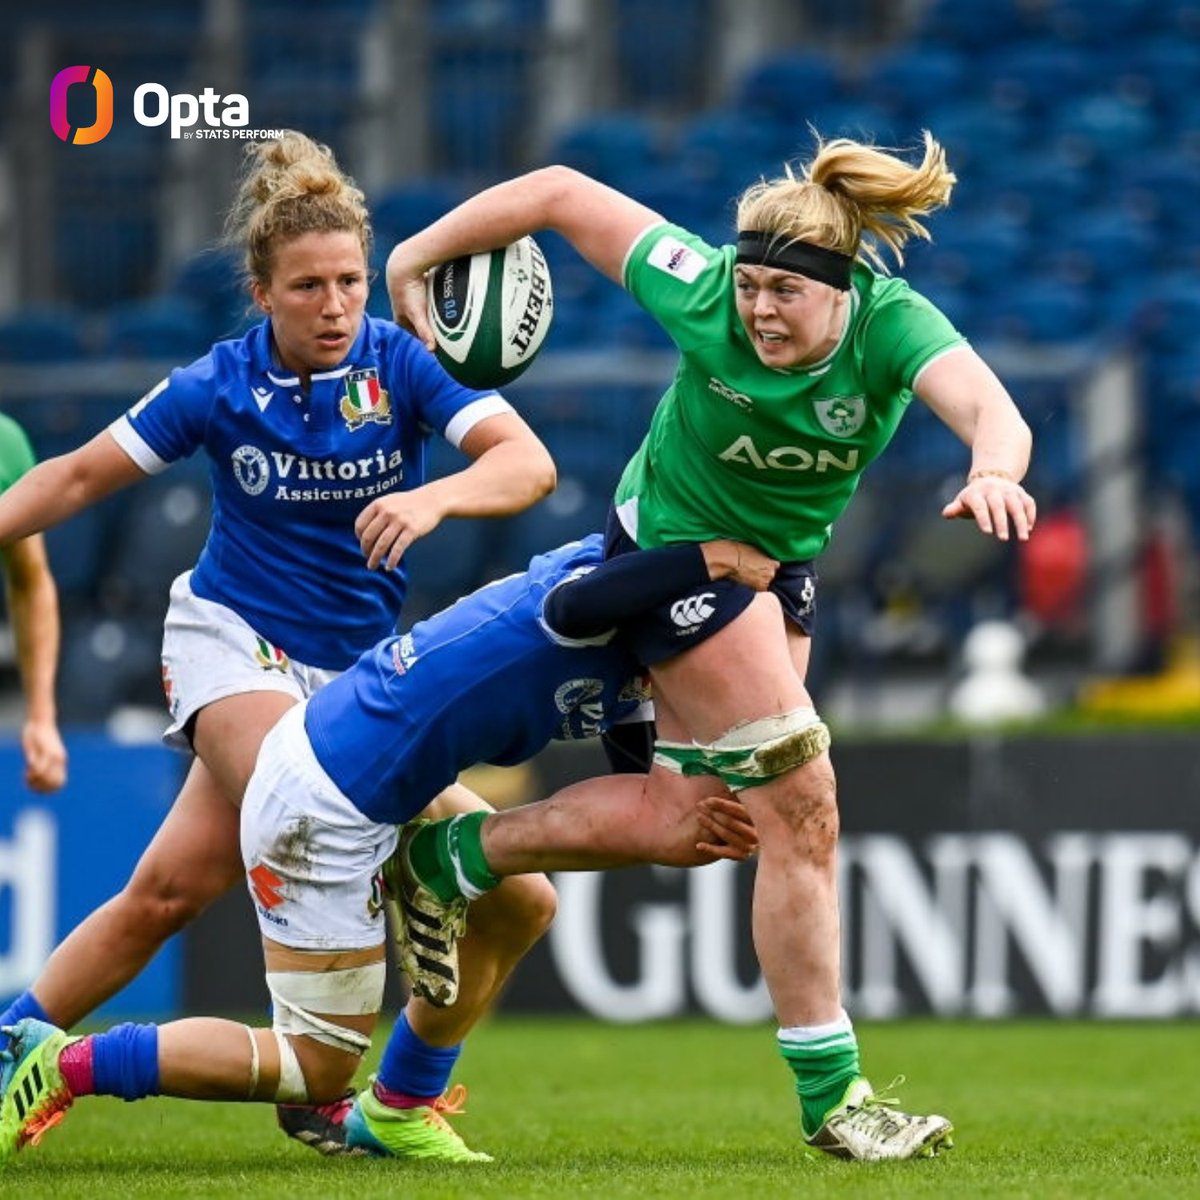 30 - @IrishRugby’s Sam Monaghan made 30 carries against Italy on Sunday, the first time a player has made 30+ carries in a single @Womens6Nations match since Scotland’s Jade Konkel-Roberts v Ireland in 2020 (32). Relentless.